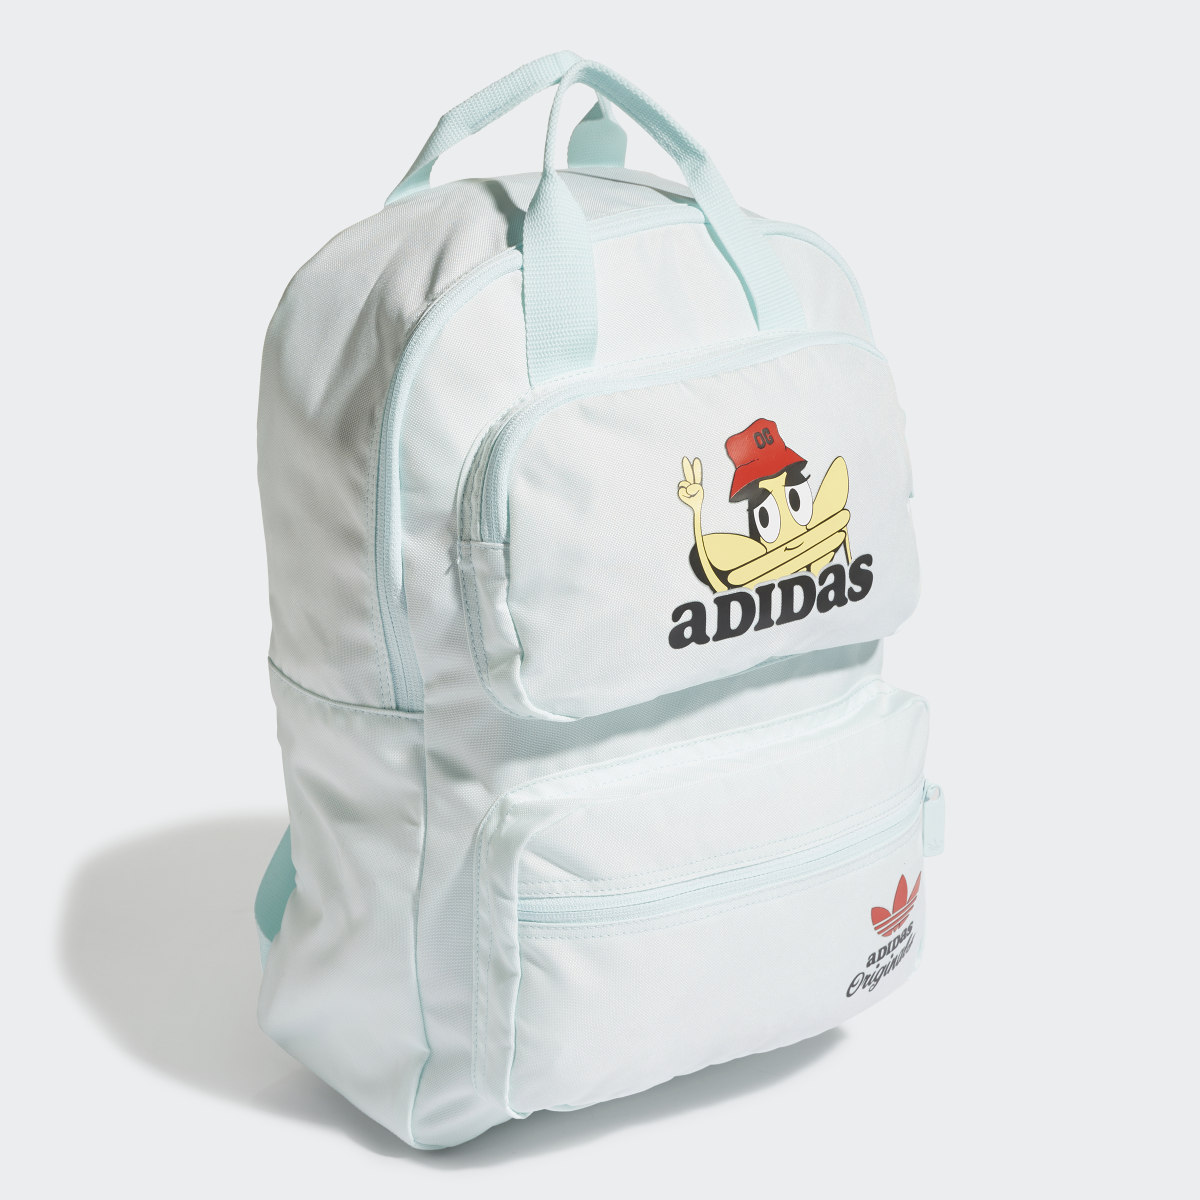 Adidas Fun Trefoil Two-Way Backpack. 4